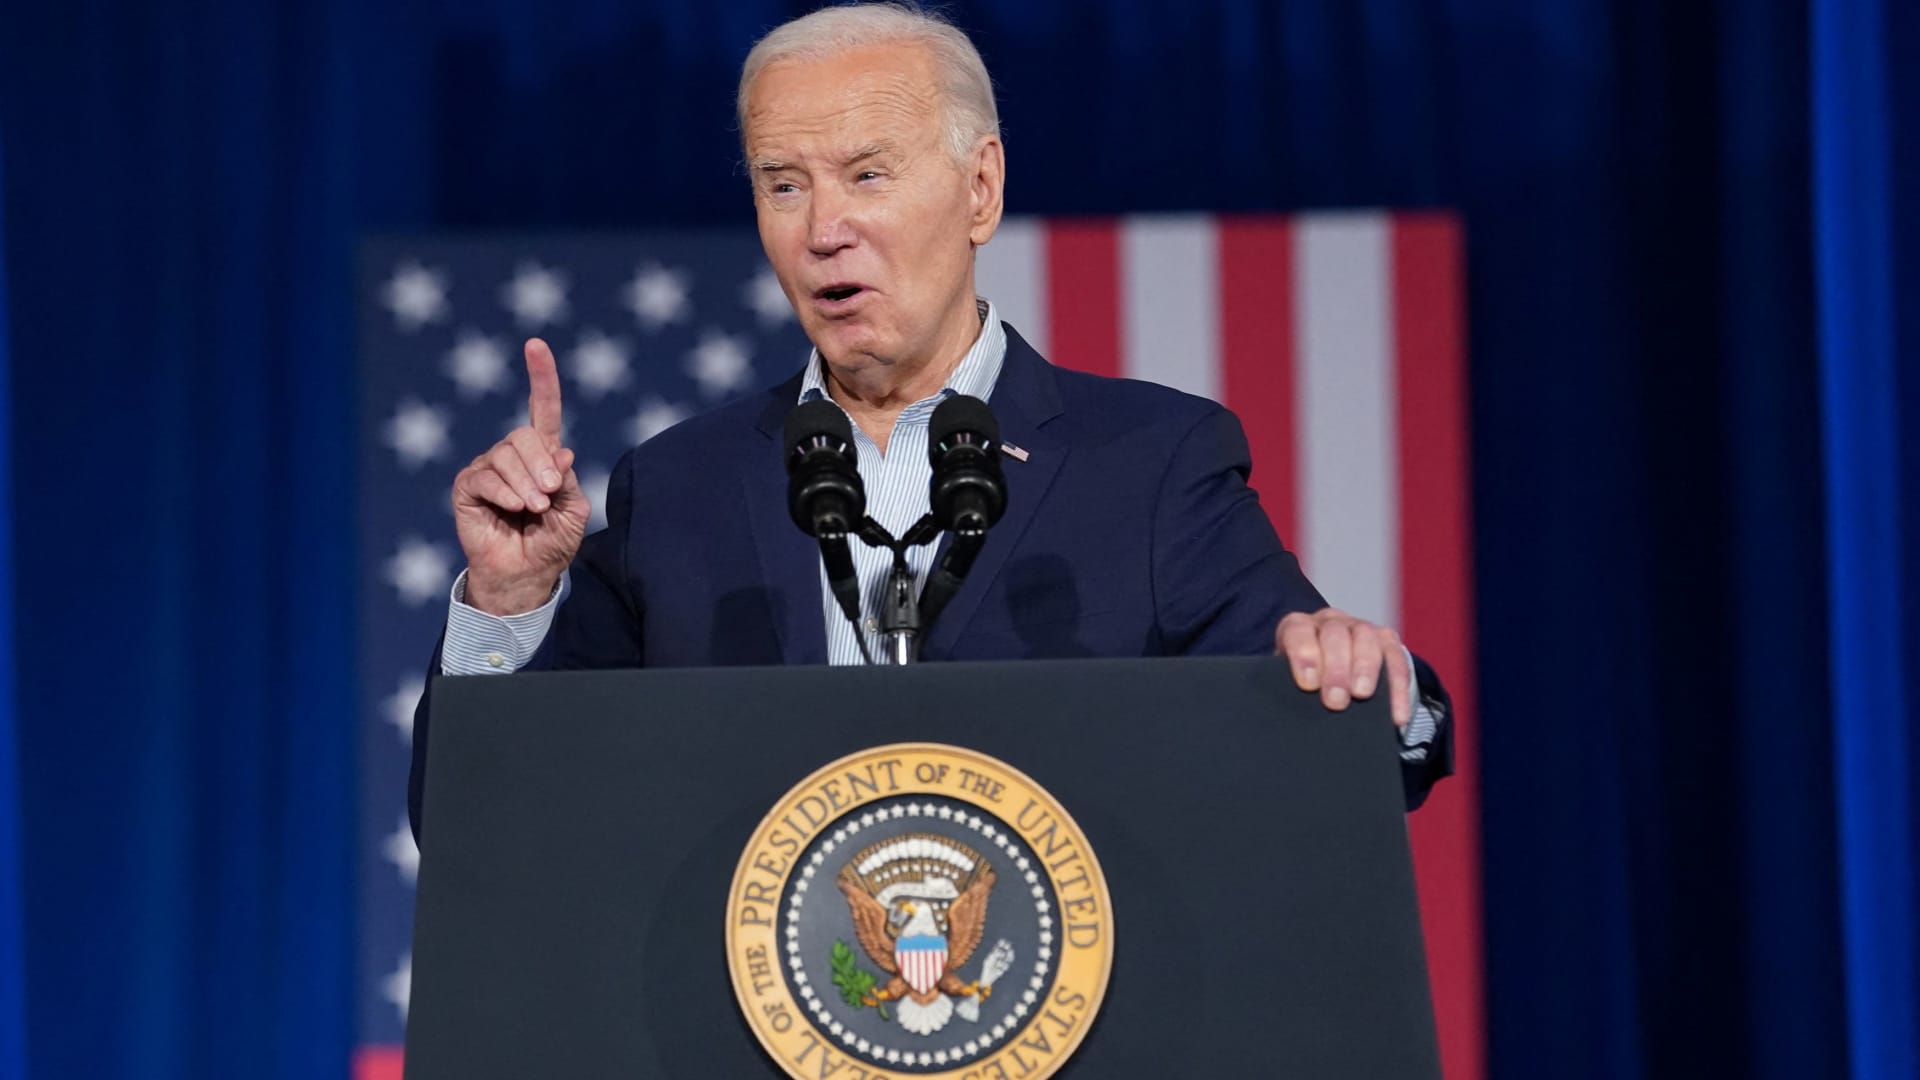 Embracing Diversity: Biden Emphasizes Importance of Immigrants in U.S. Economy and Criticizes Xenophobia in Other Countries